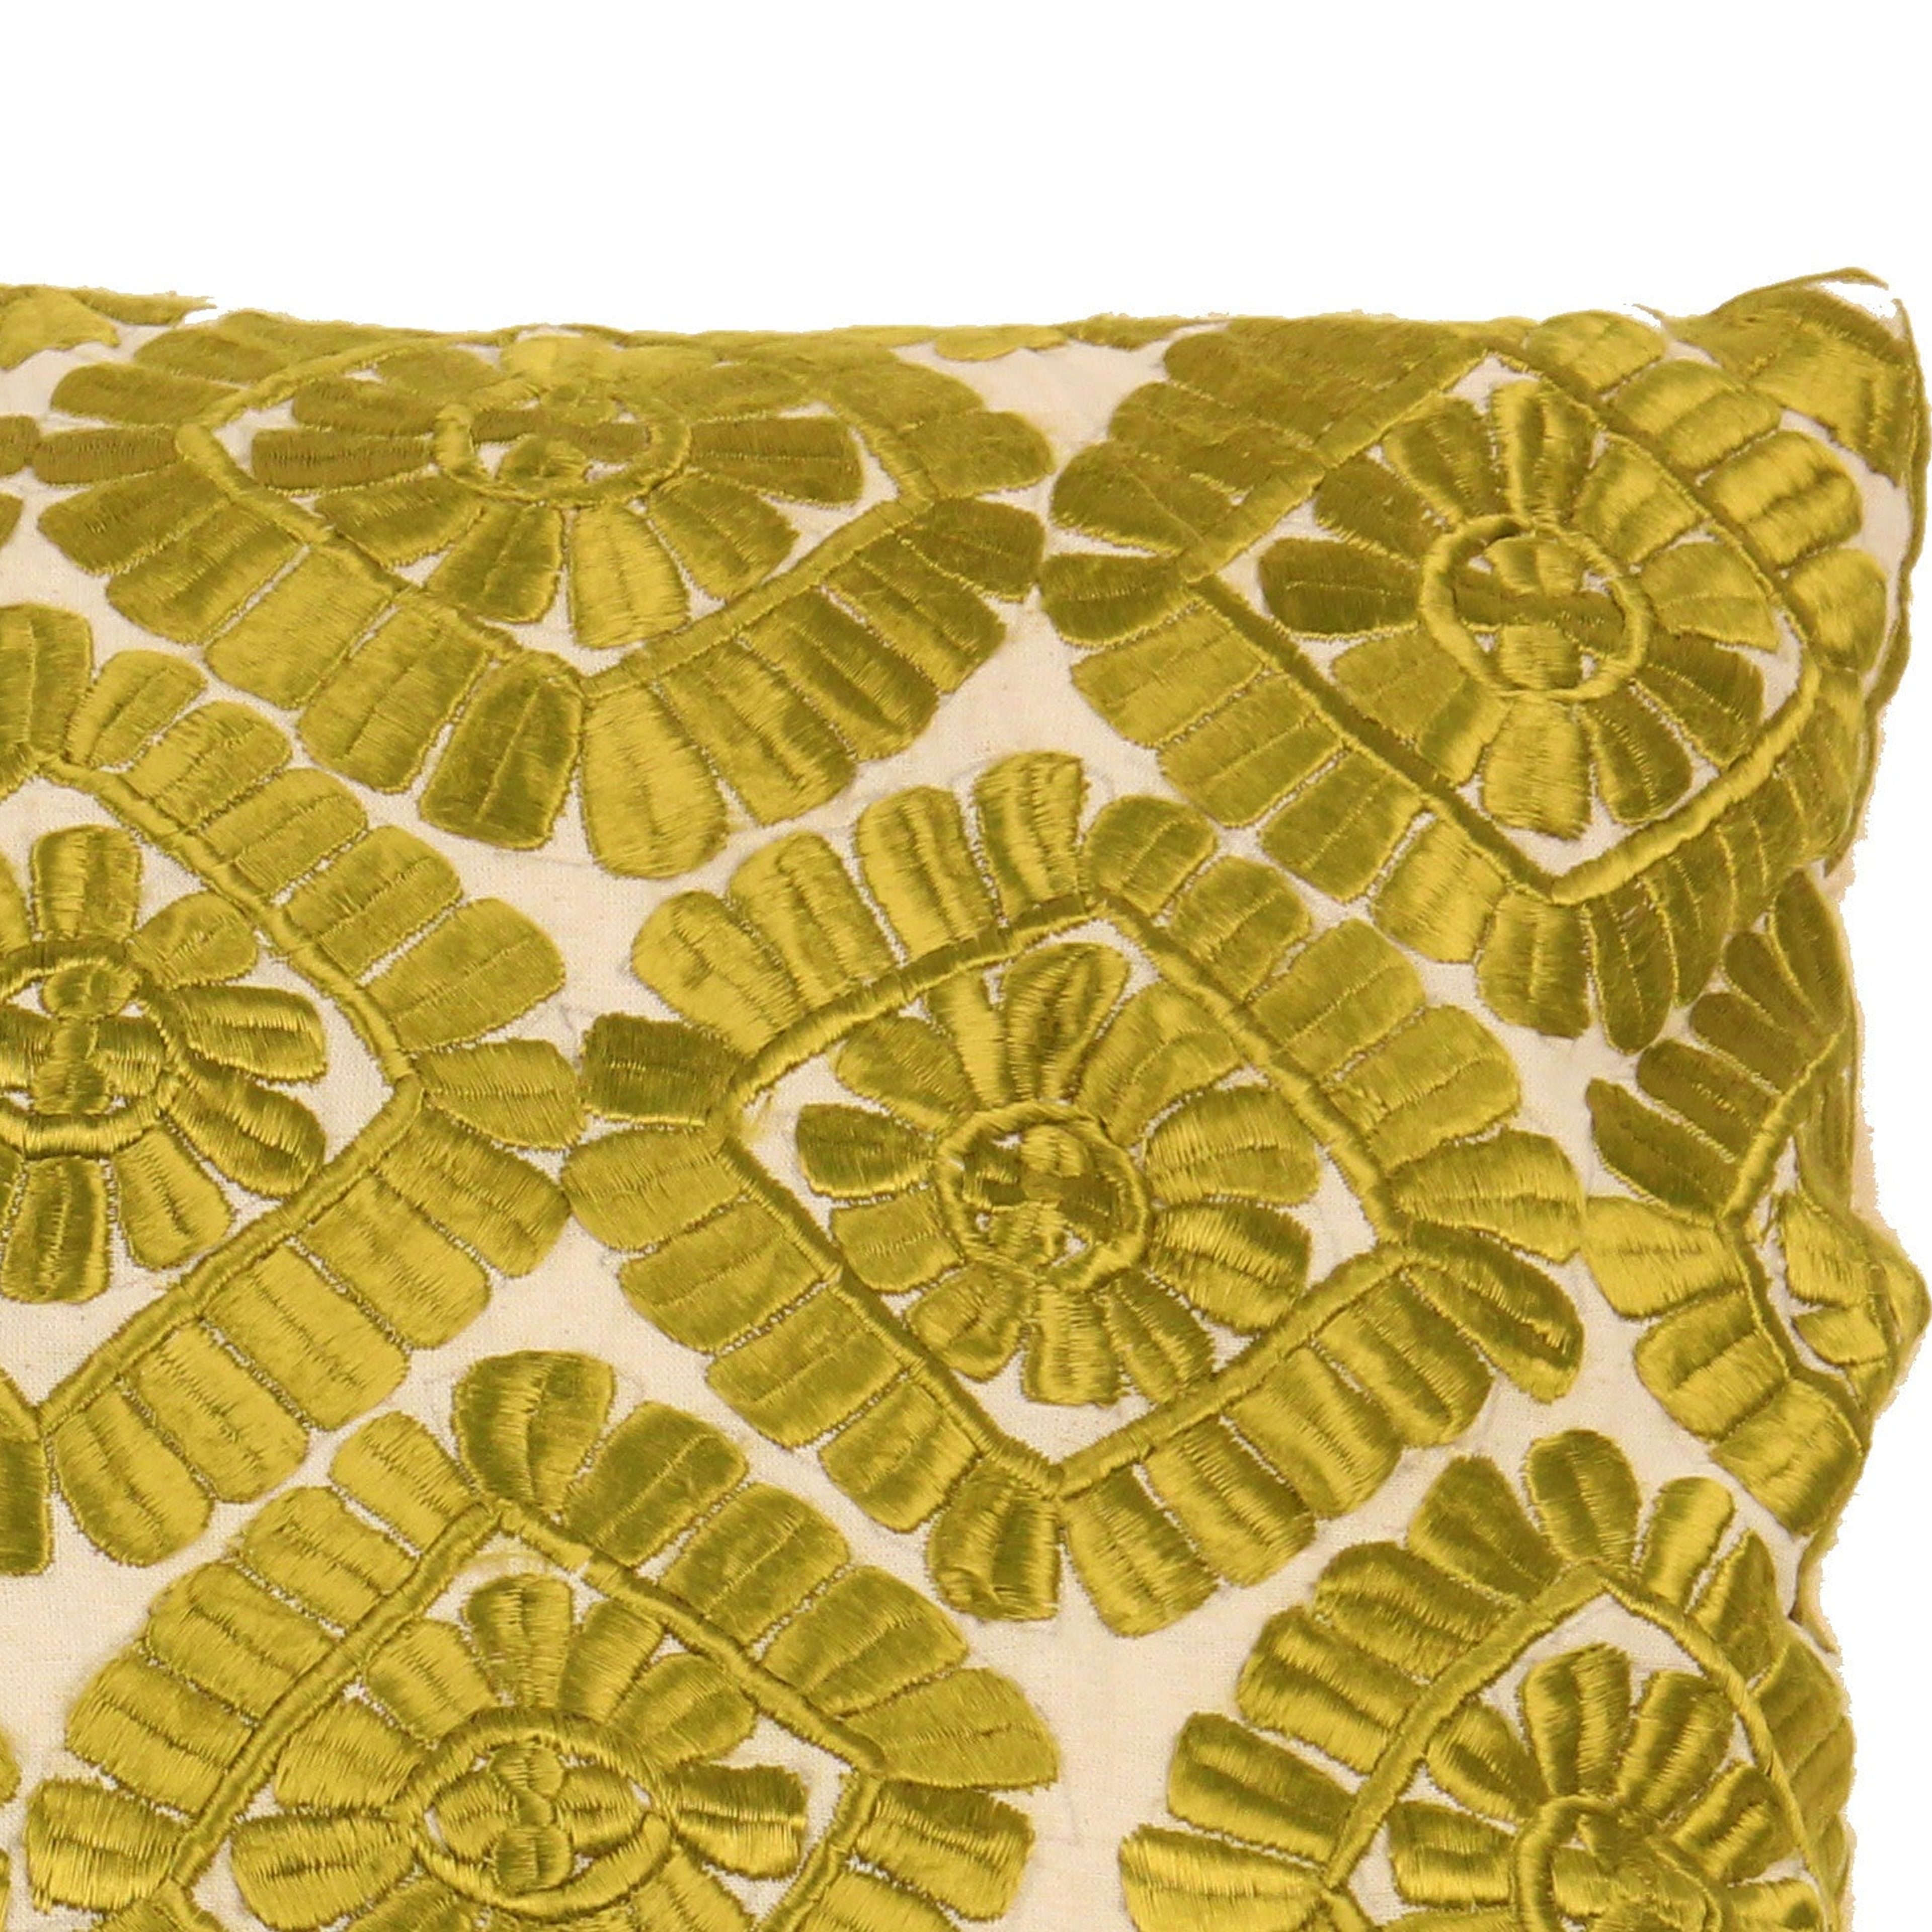 Moroccan Embroidered Pillow, Green